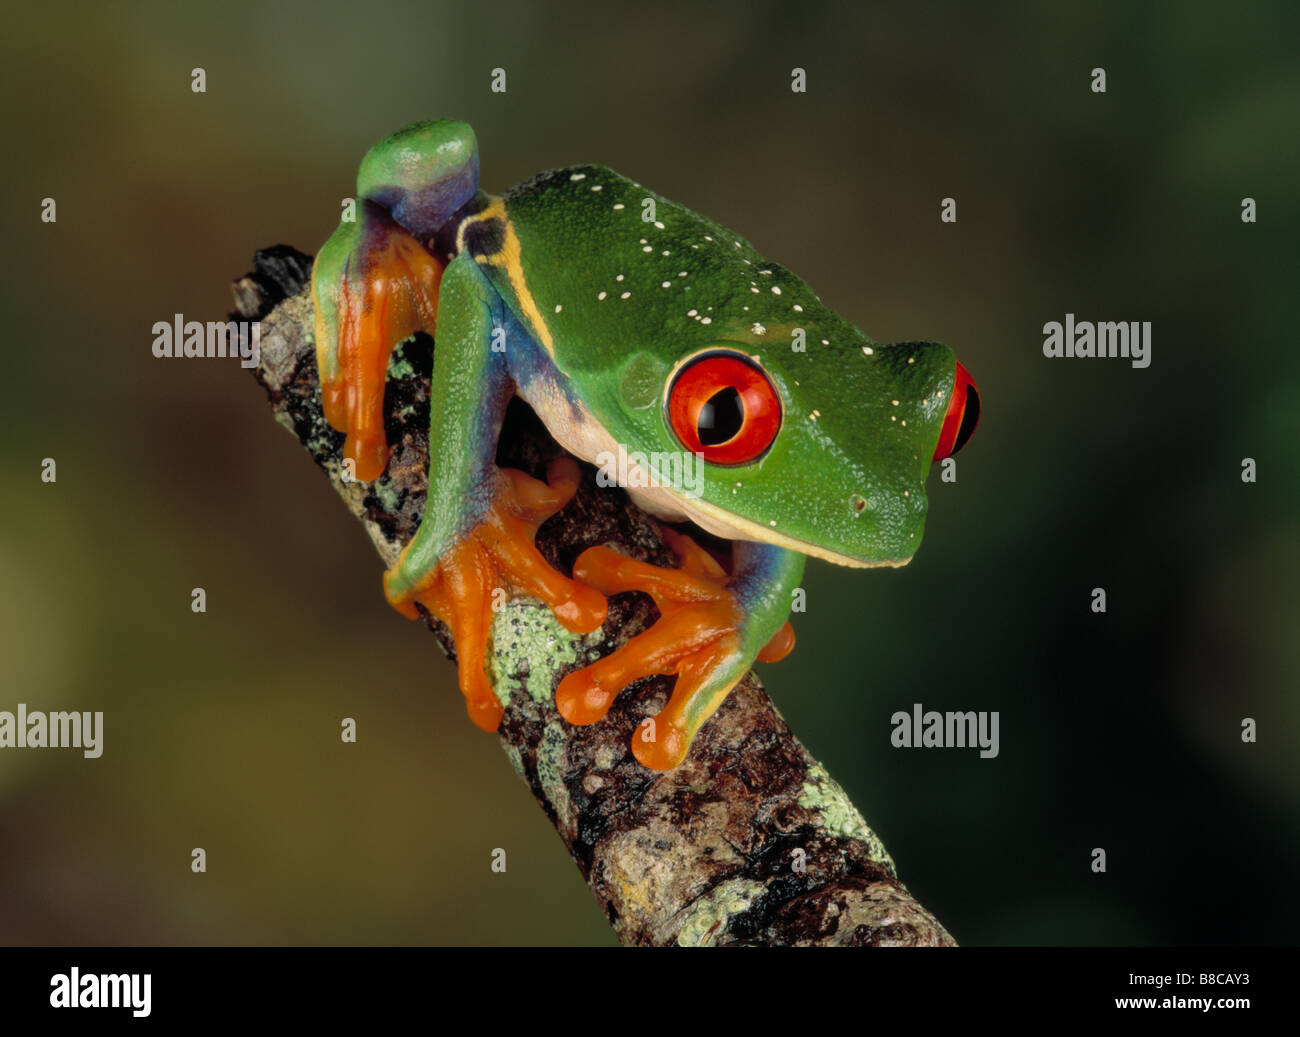 RED-EYED TREE FROG Stock Photo